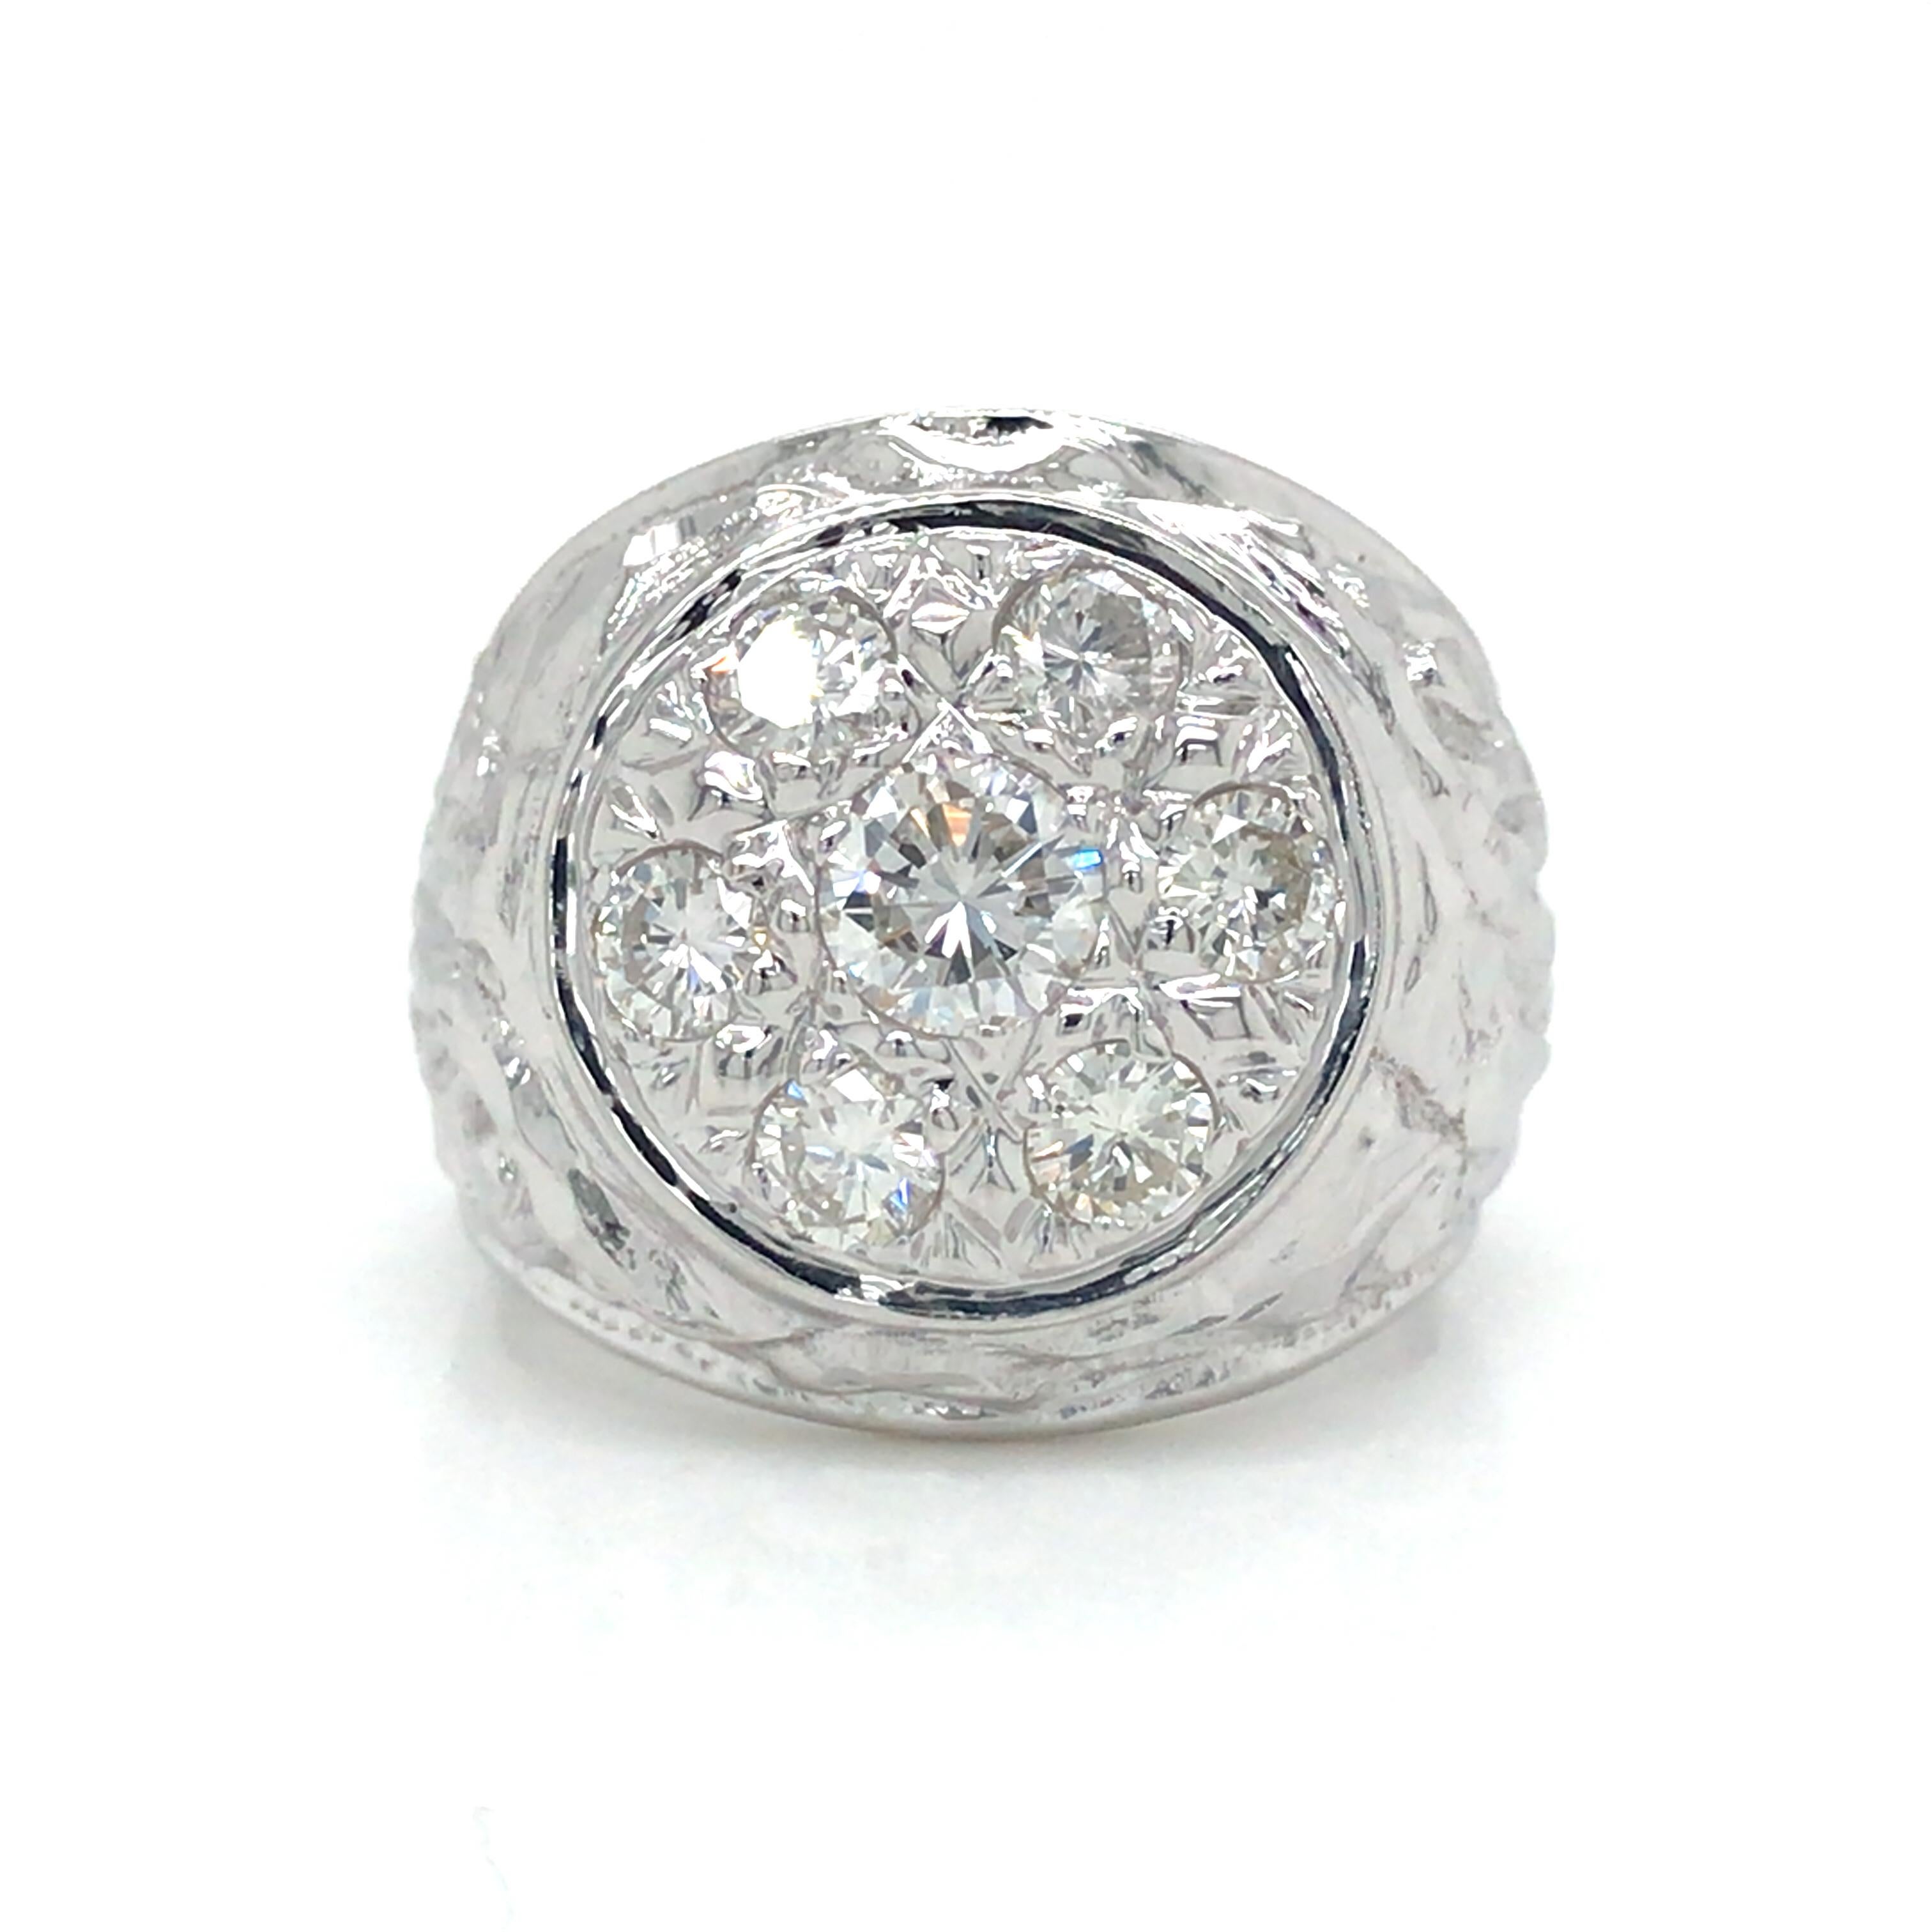 Vintage Diamond Cluster Signet Ring in 18K White Gold.   Round Brilliant Cut Diamonds weighing 1.50 carat total weight, G-H in color and VS in clarity are expertly set.  The Ring measures 3/4 inch in width at the widest point.  Ring size 6 1/2.